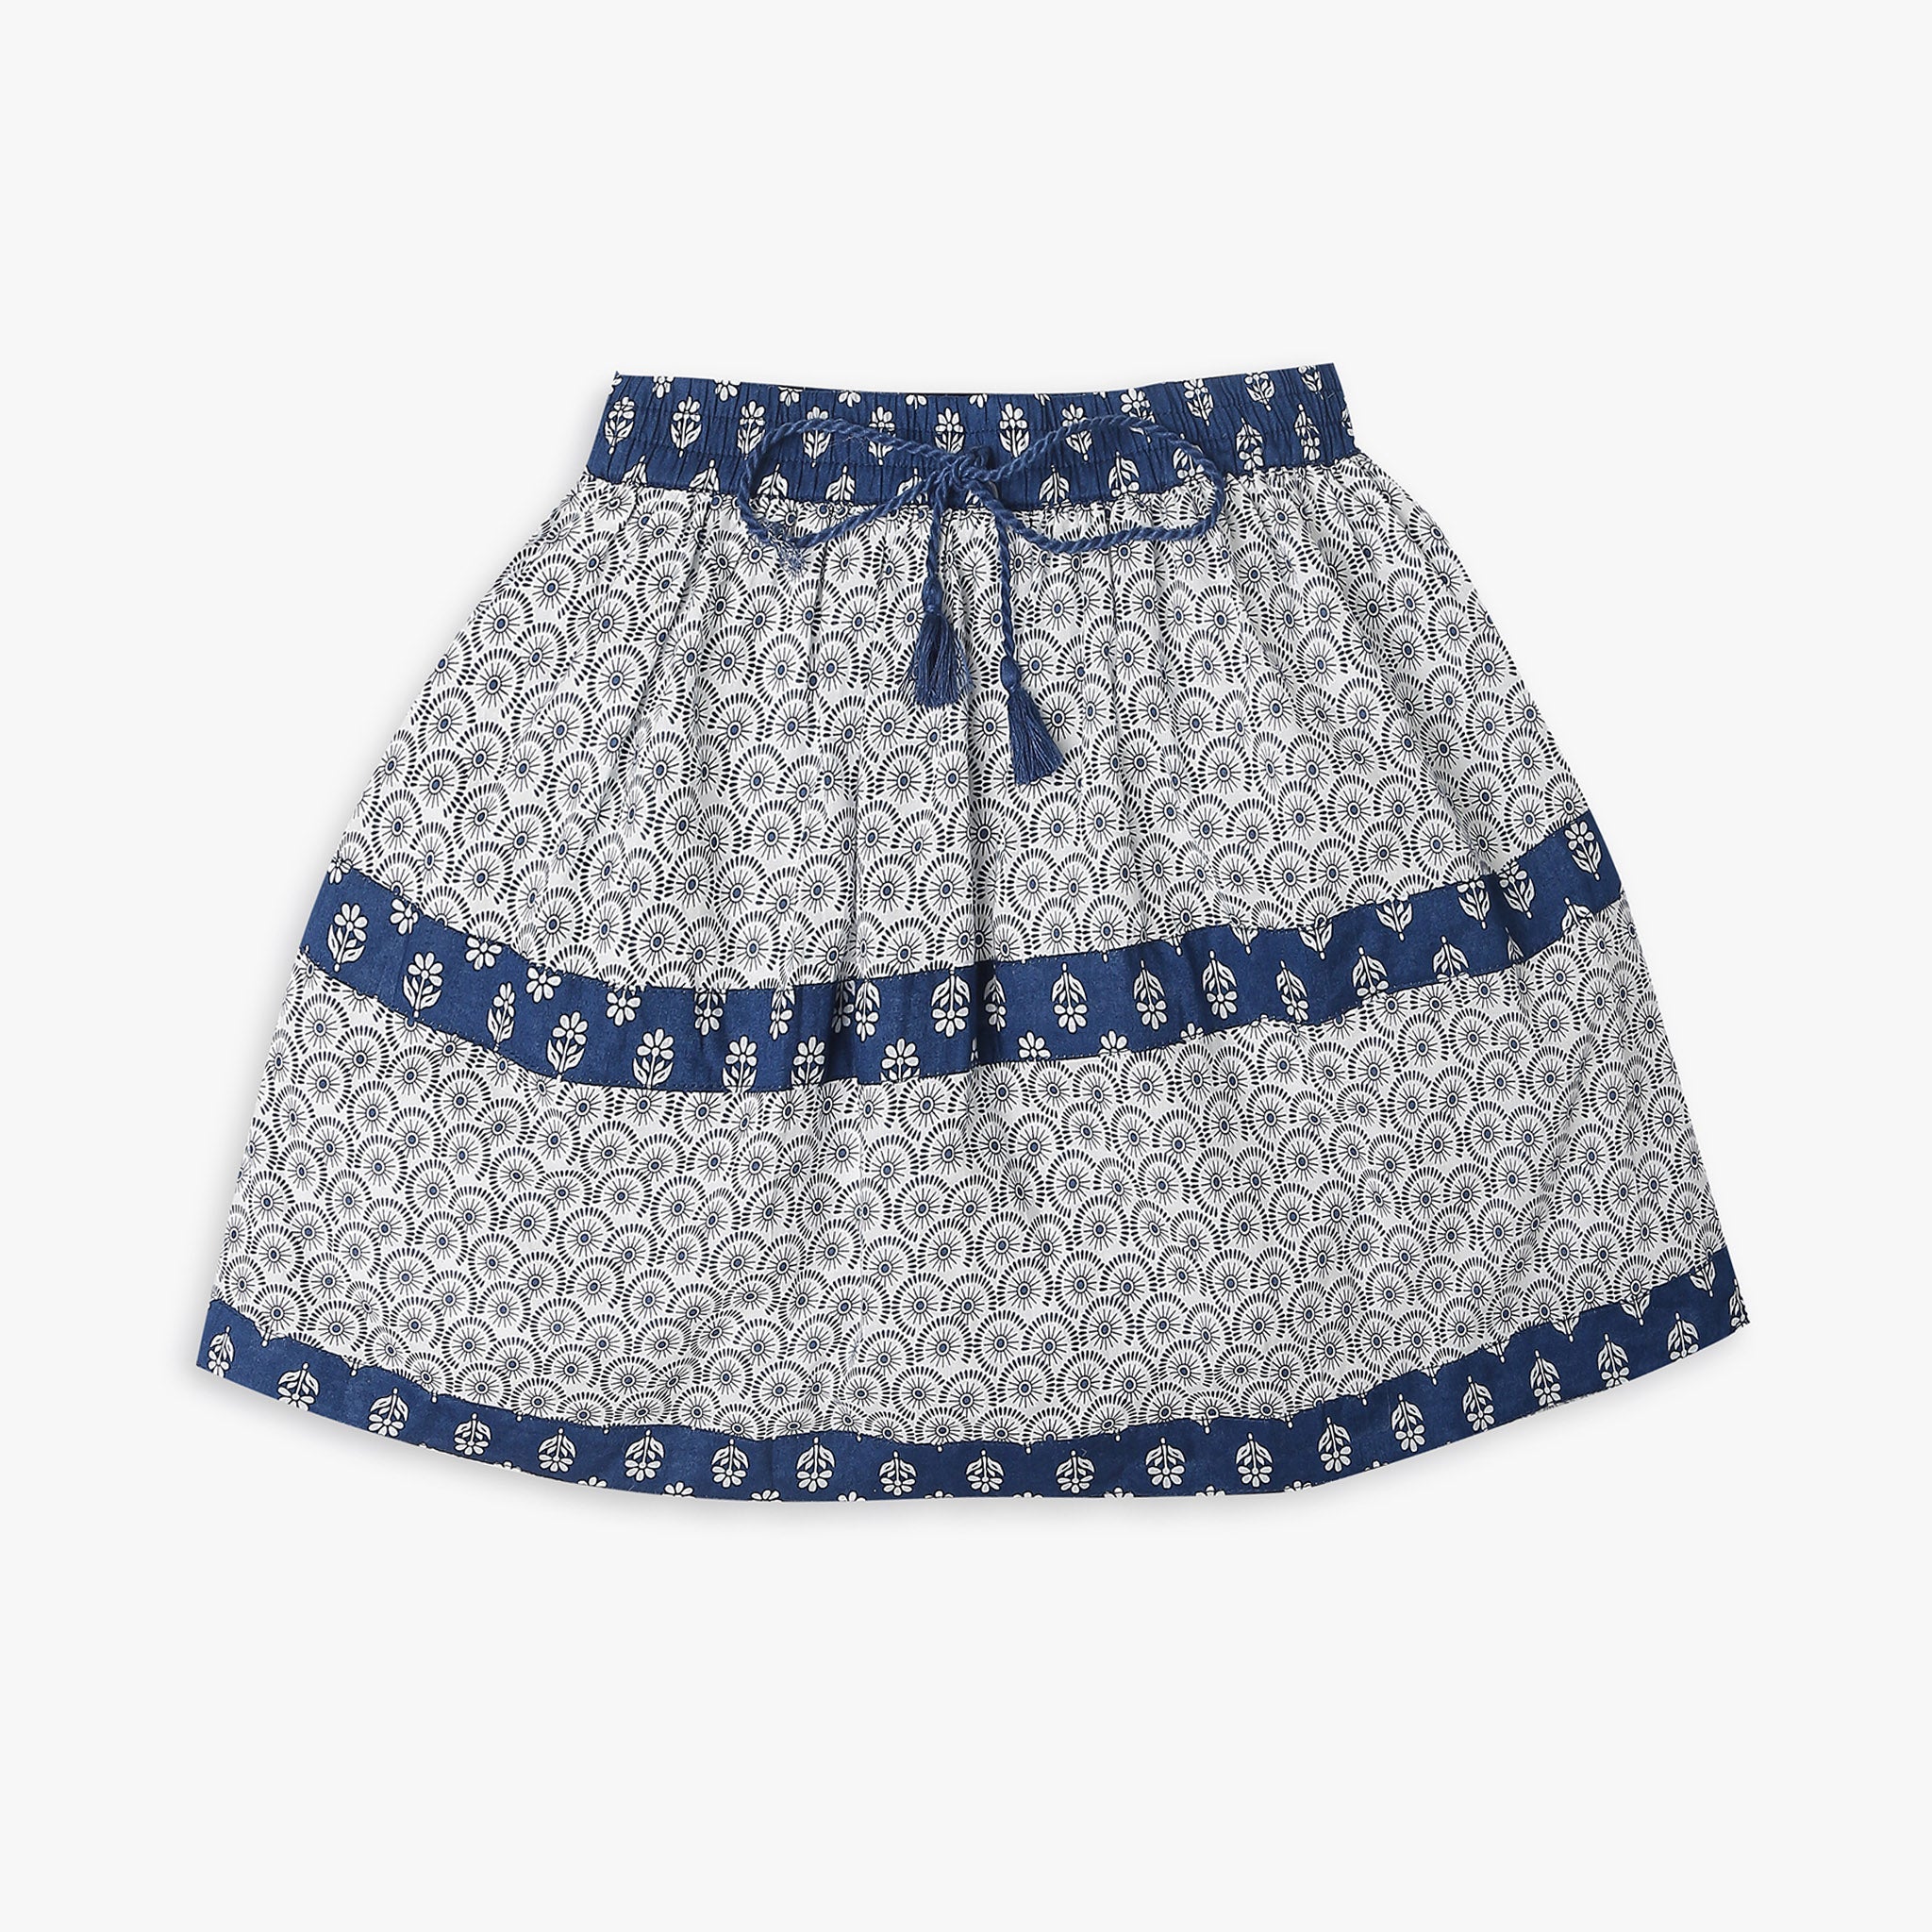 Girl's Regular Fit Solid Mid Rise Skirts